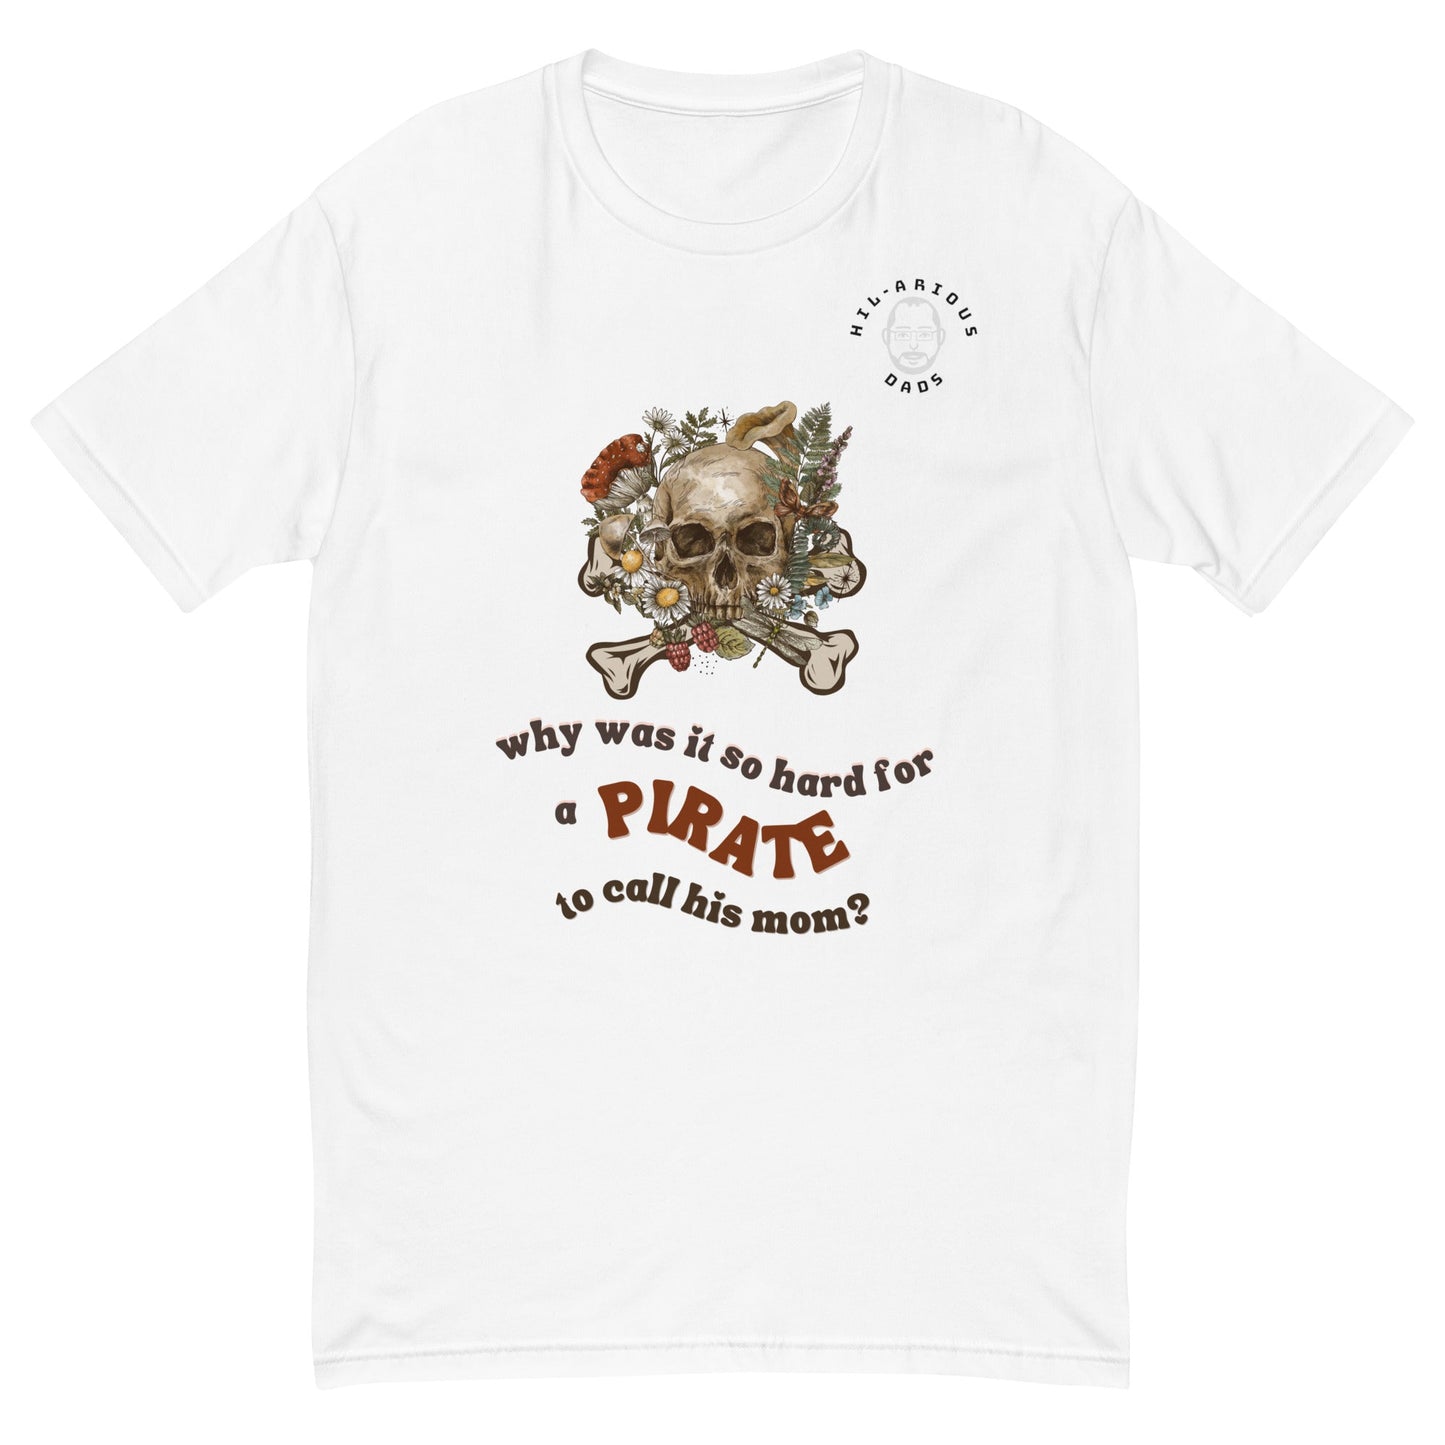 Why was it so hard for a pirate to call his mom?-T-shirt - Hil-arious Dads